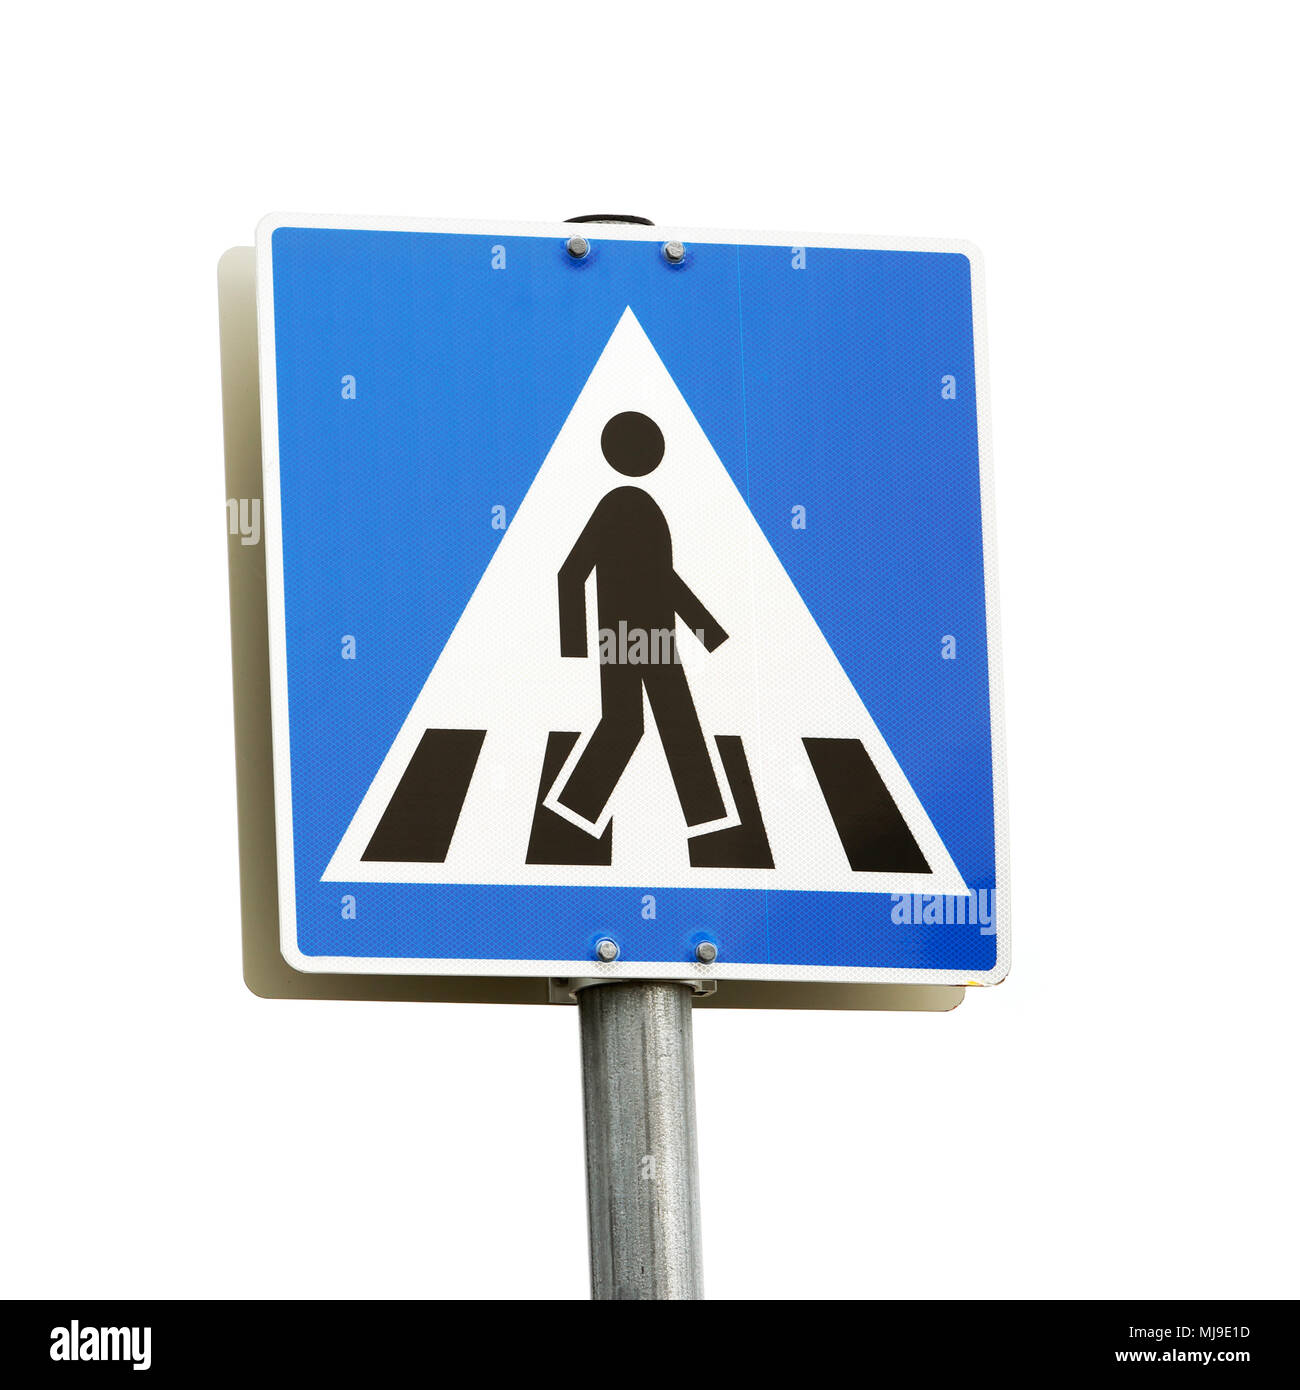 155 Pedestrian Crossing Sign High Res Illustrations - Getty Images